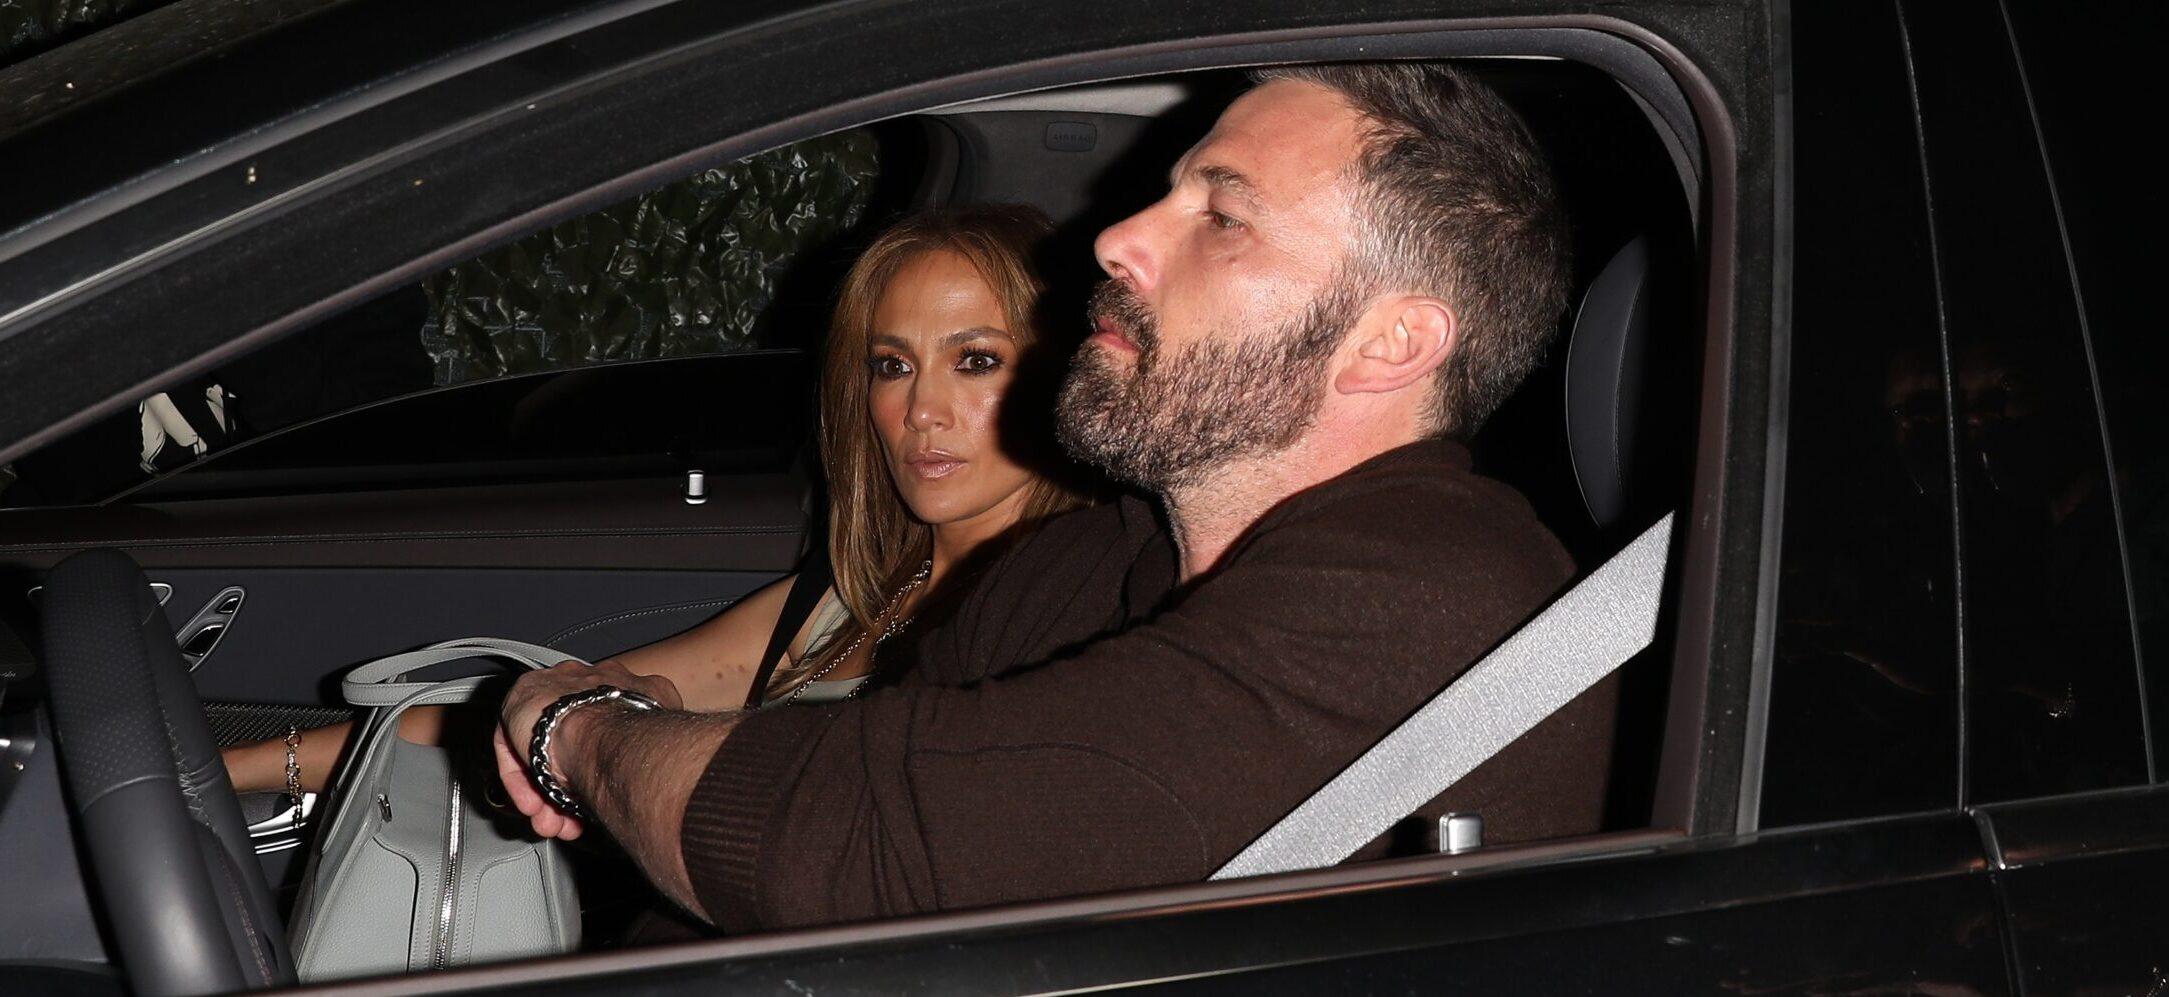 Ben Affleck & Jennifer Lopez Seen Having Another Heated Exchange At A Red Light Amid Claims That The Actor Is 'Miserable'